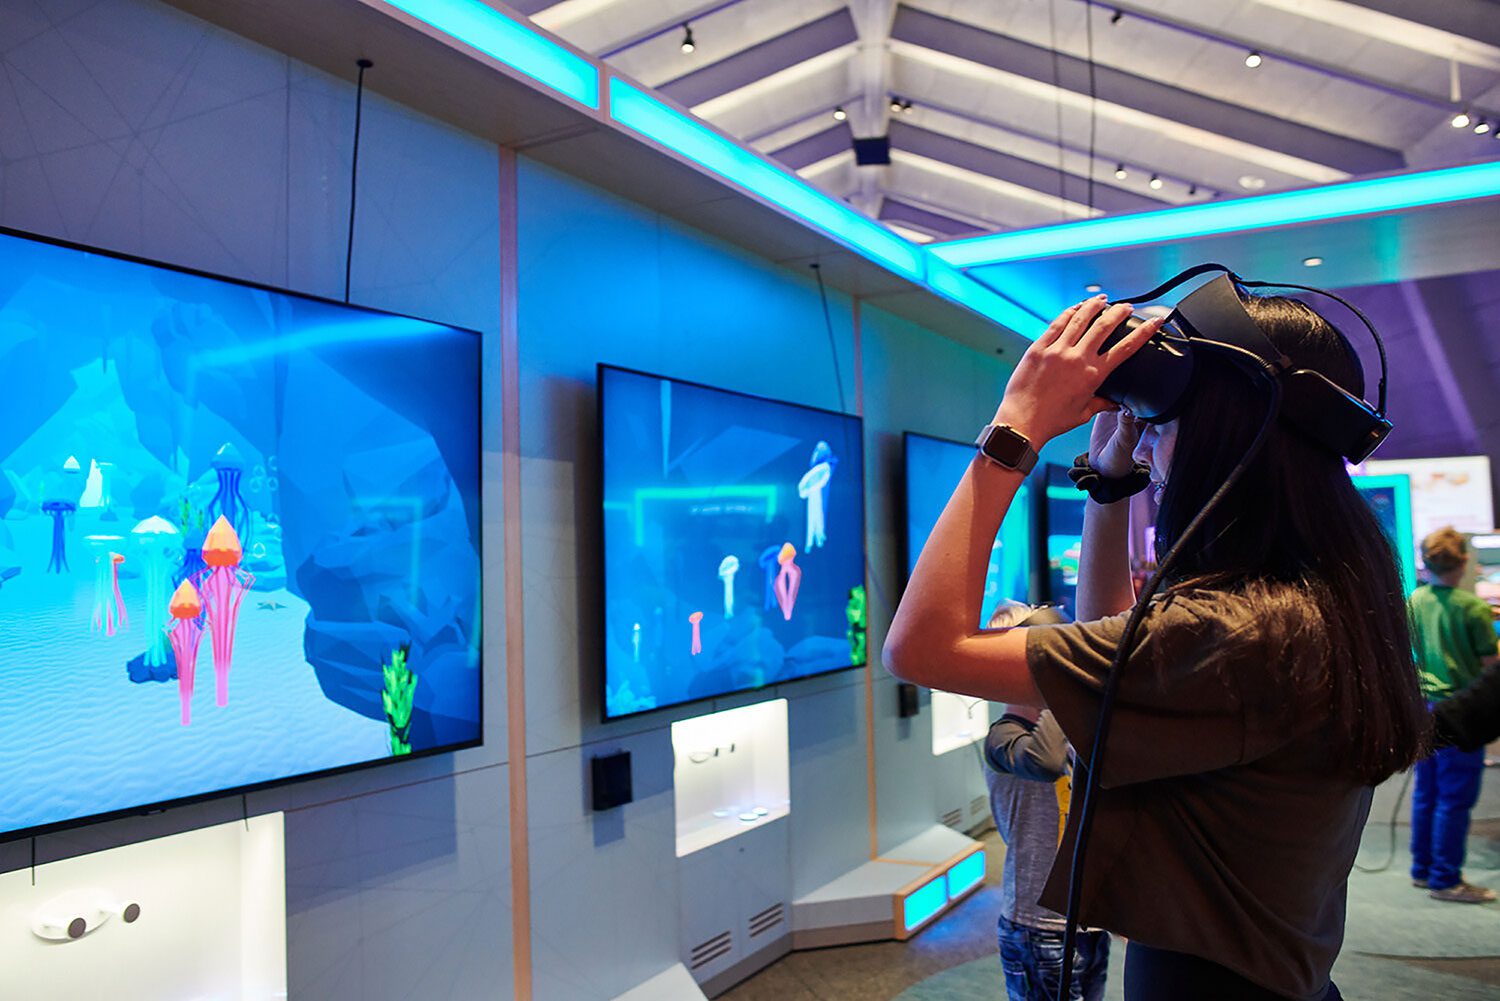 A girl with long brown hair puts on a virtual reality headset and examines a number of screens that show colorful jellyfish on them.